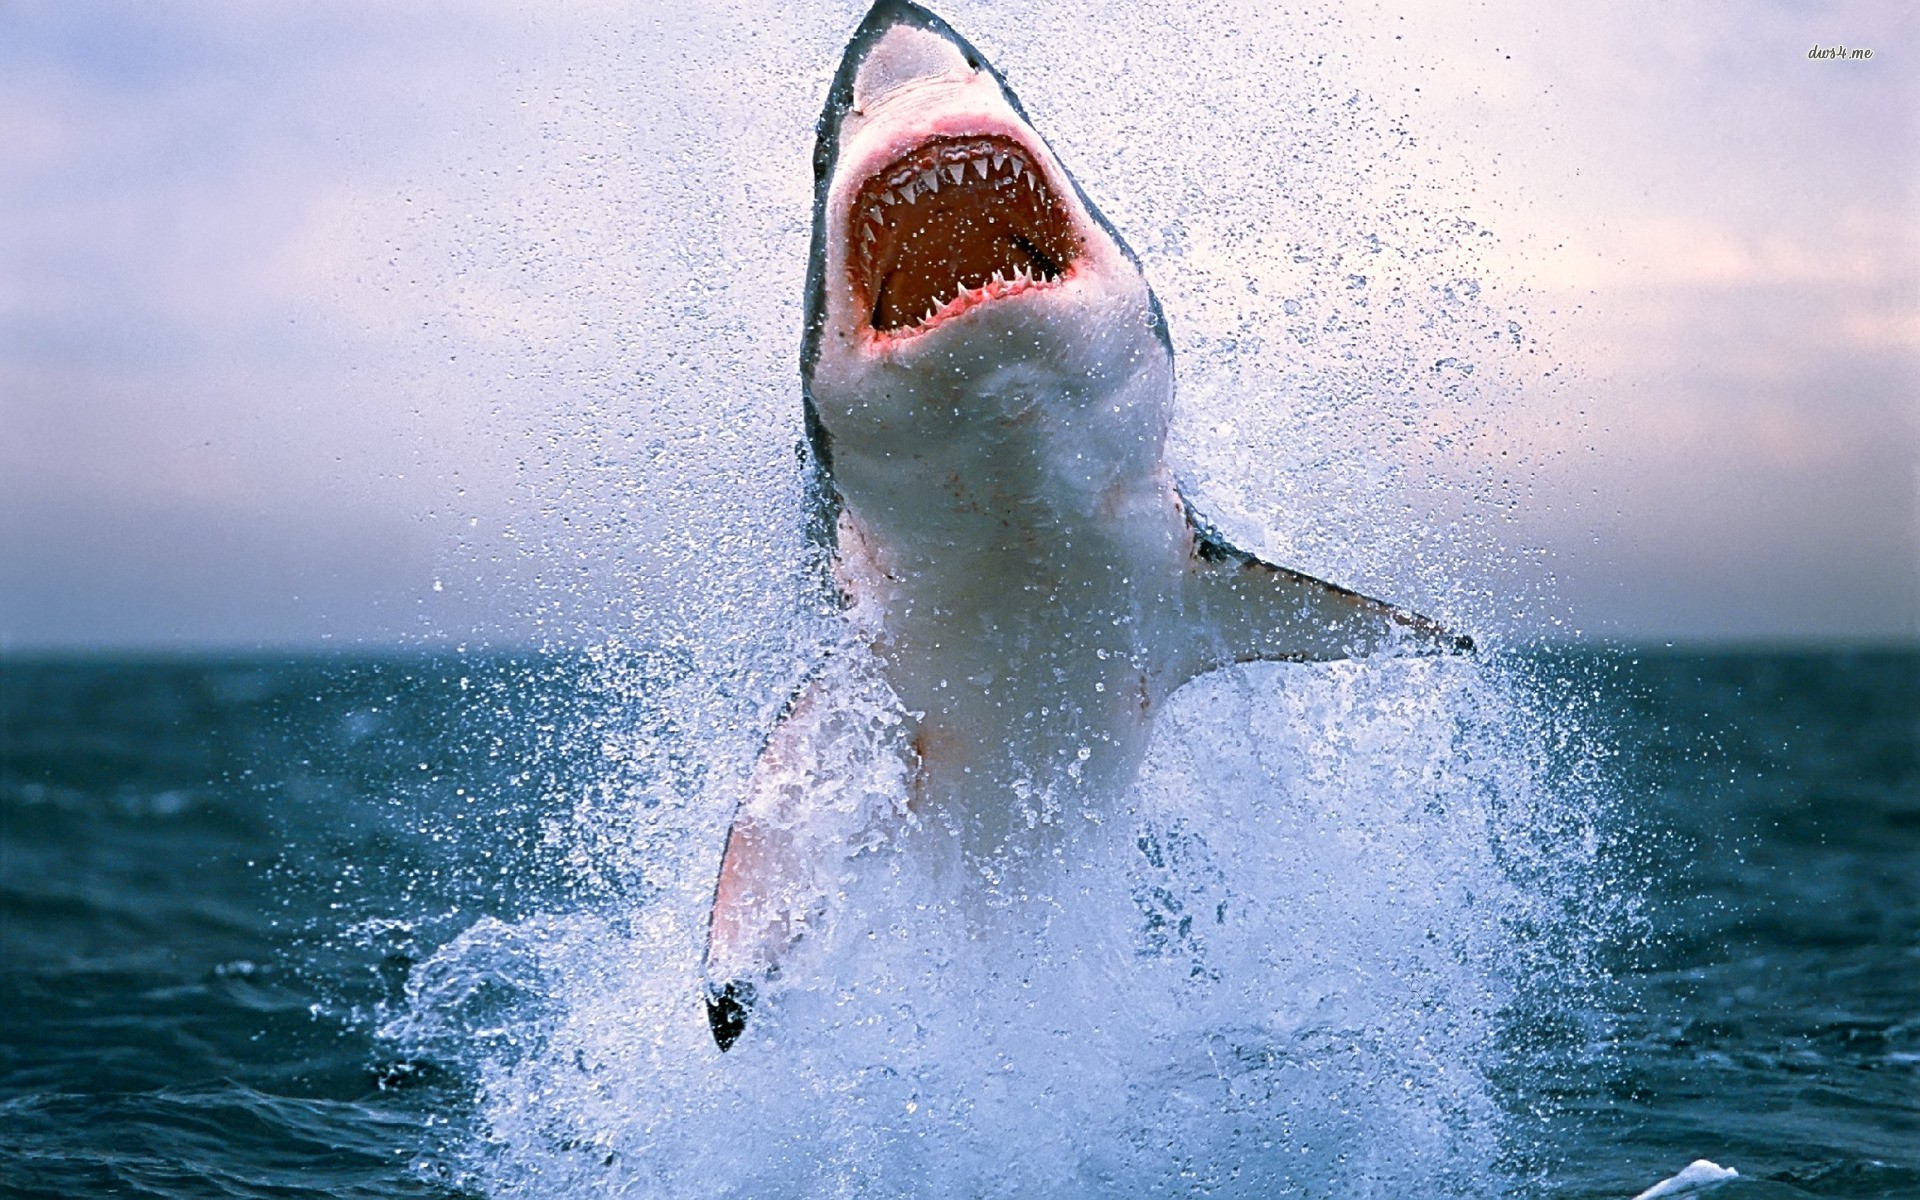 The great white shark (Carcharodon carcharias)